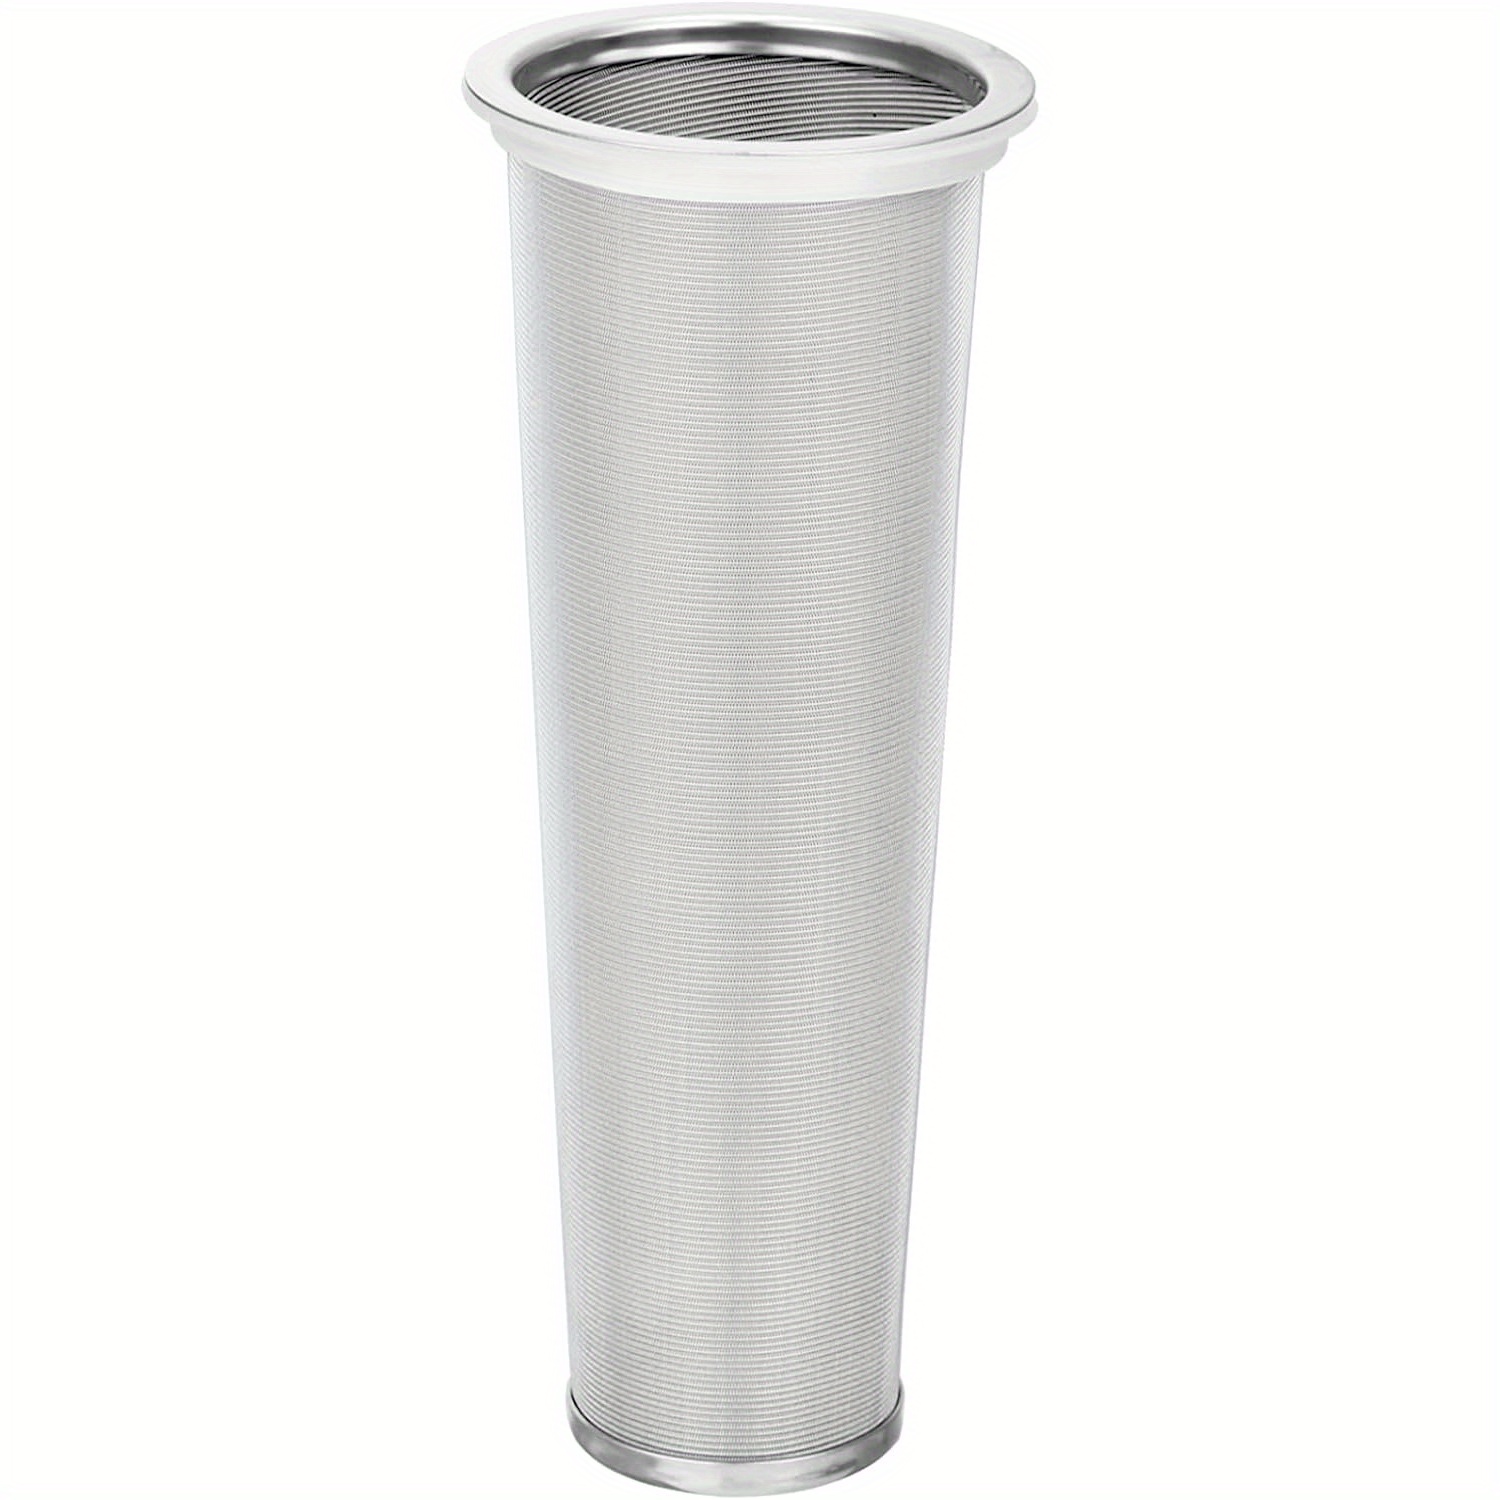 Cold Brew Coffee and Tea Maker Stainless Steel Filter (Fits Quart Size